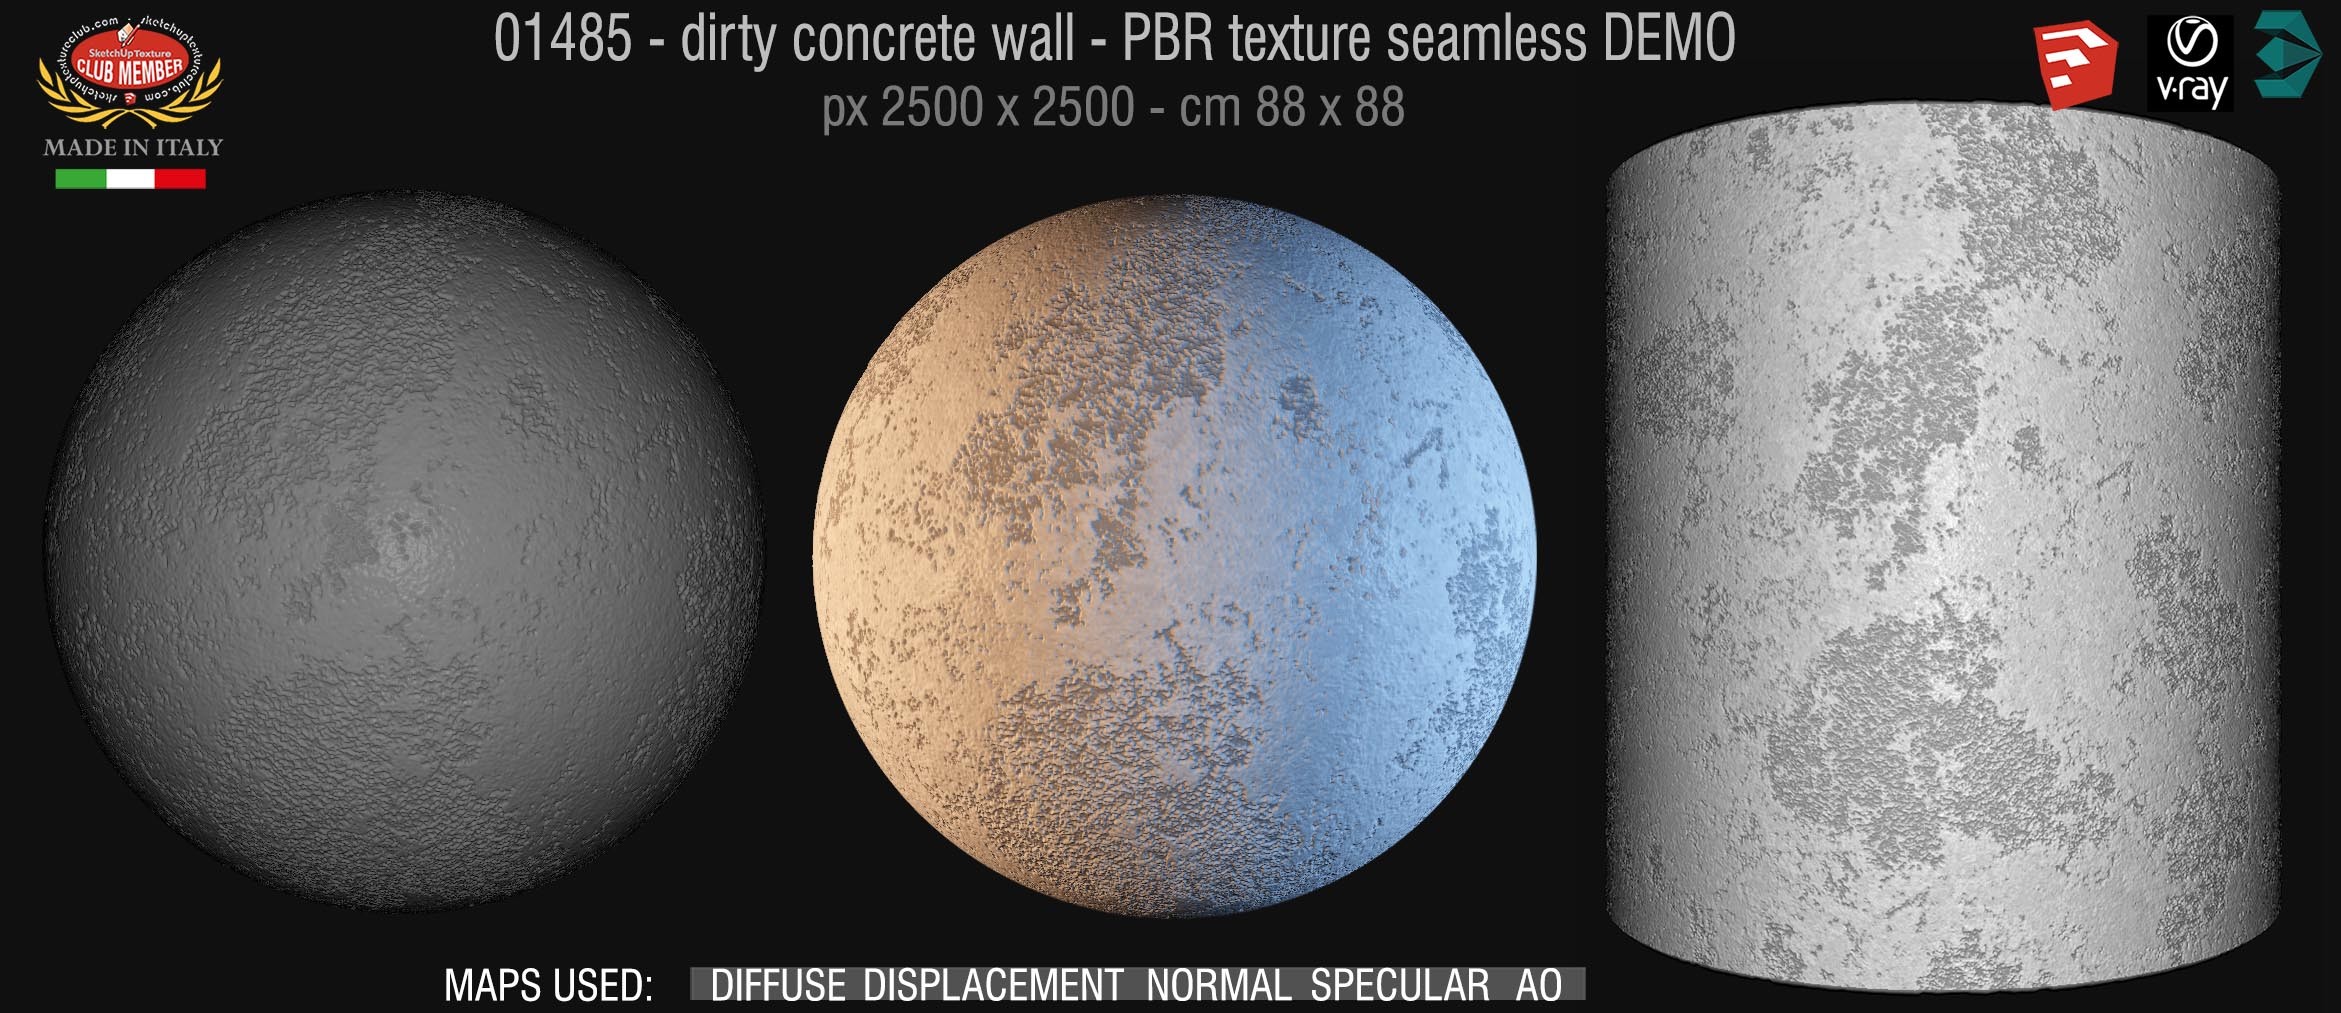 01485 Concrete bare dirty wall PBR texture seamless DEMO